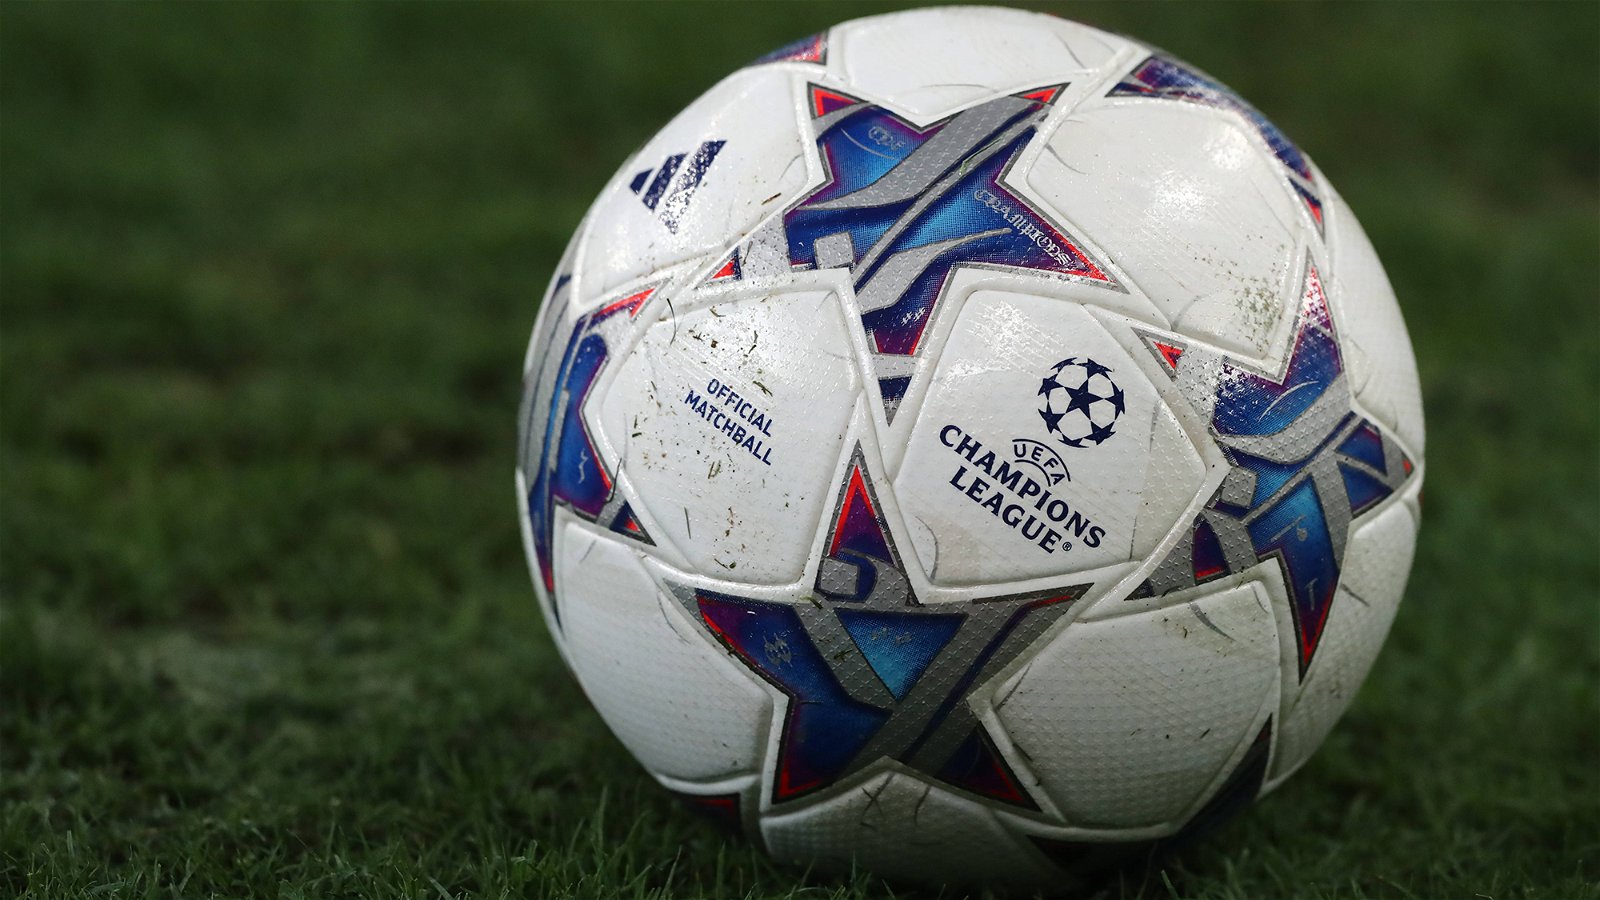 Champions League qualification completed Wednesday night – These are the 32 clubs for the 8 groups thumbnail